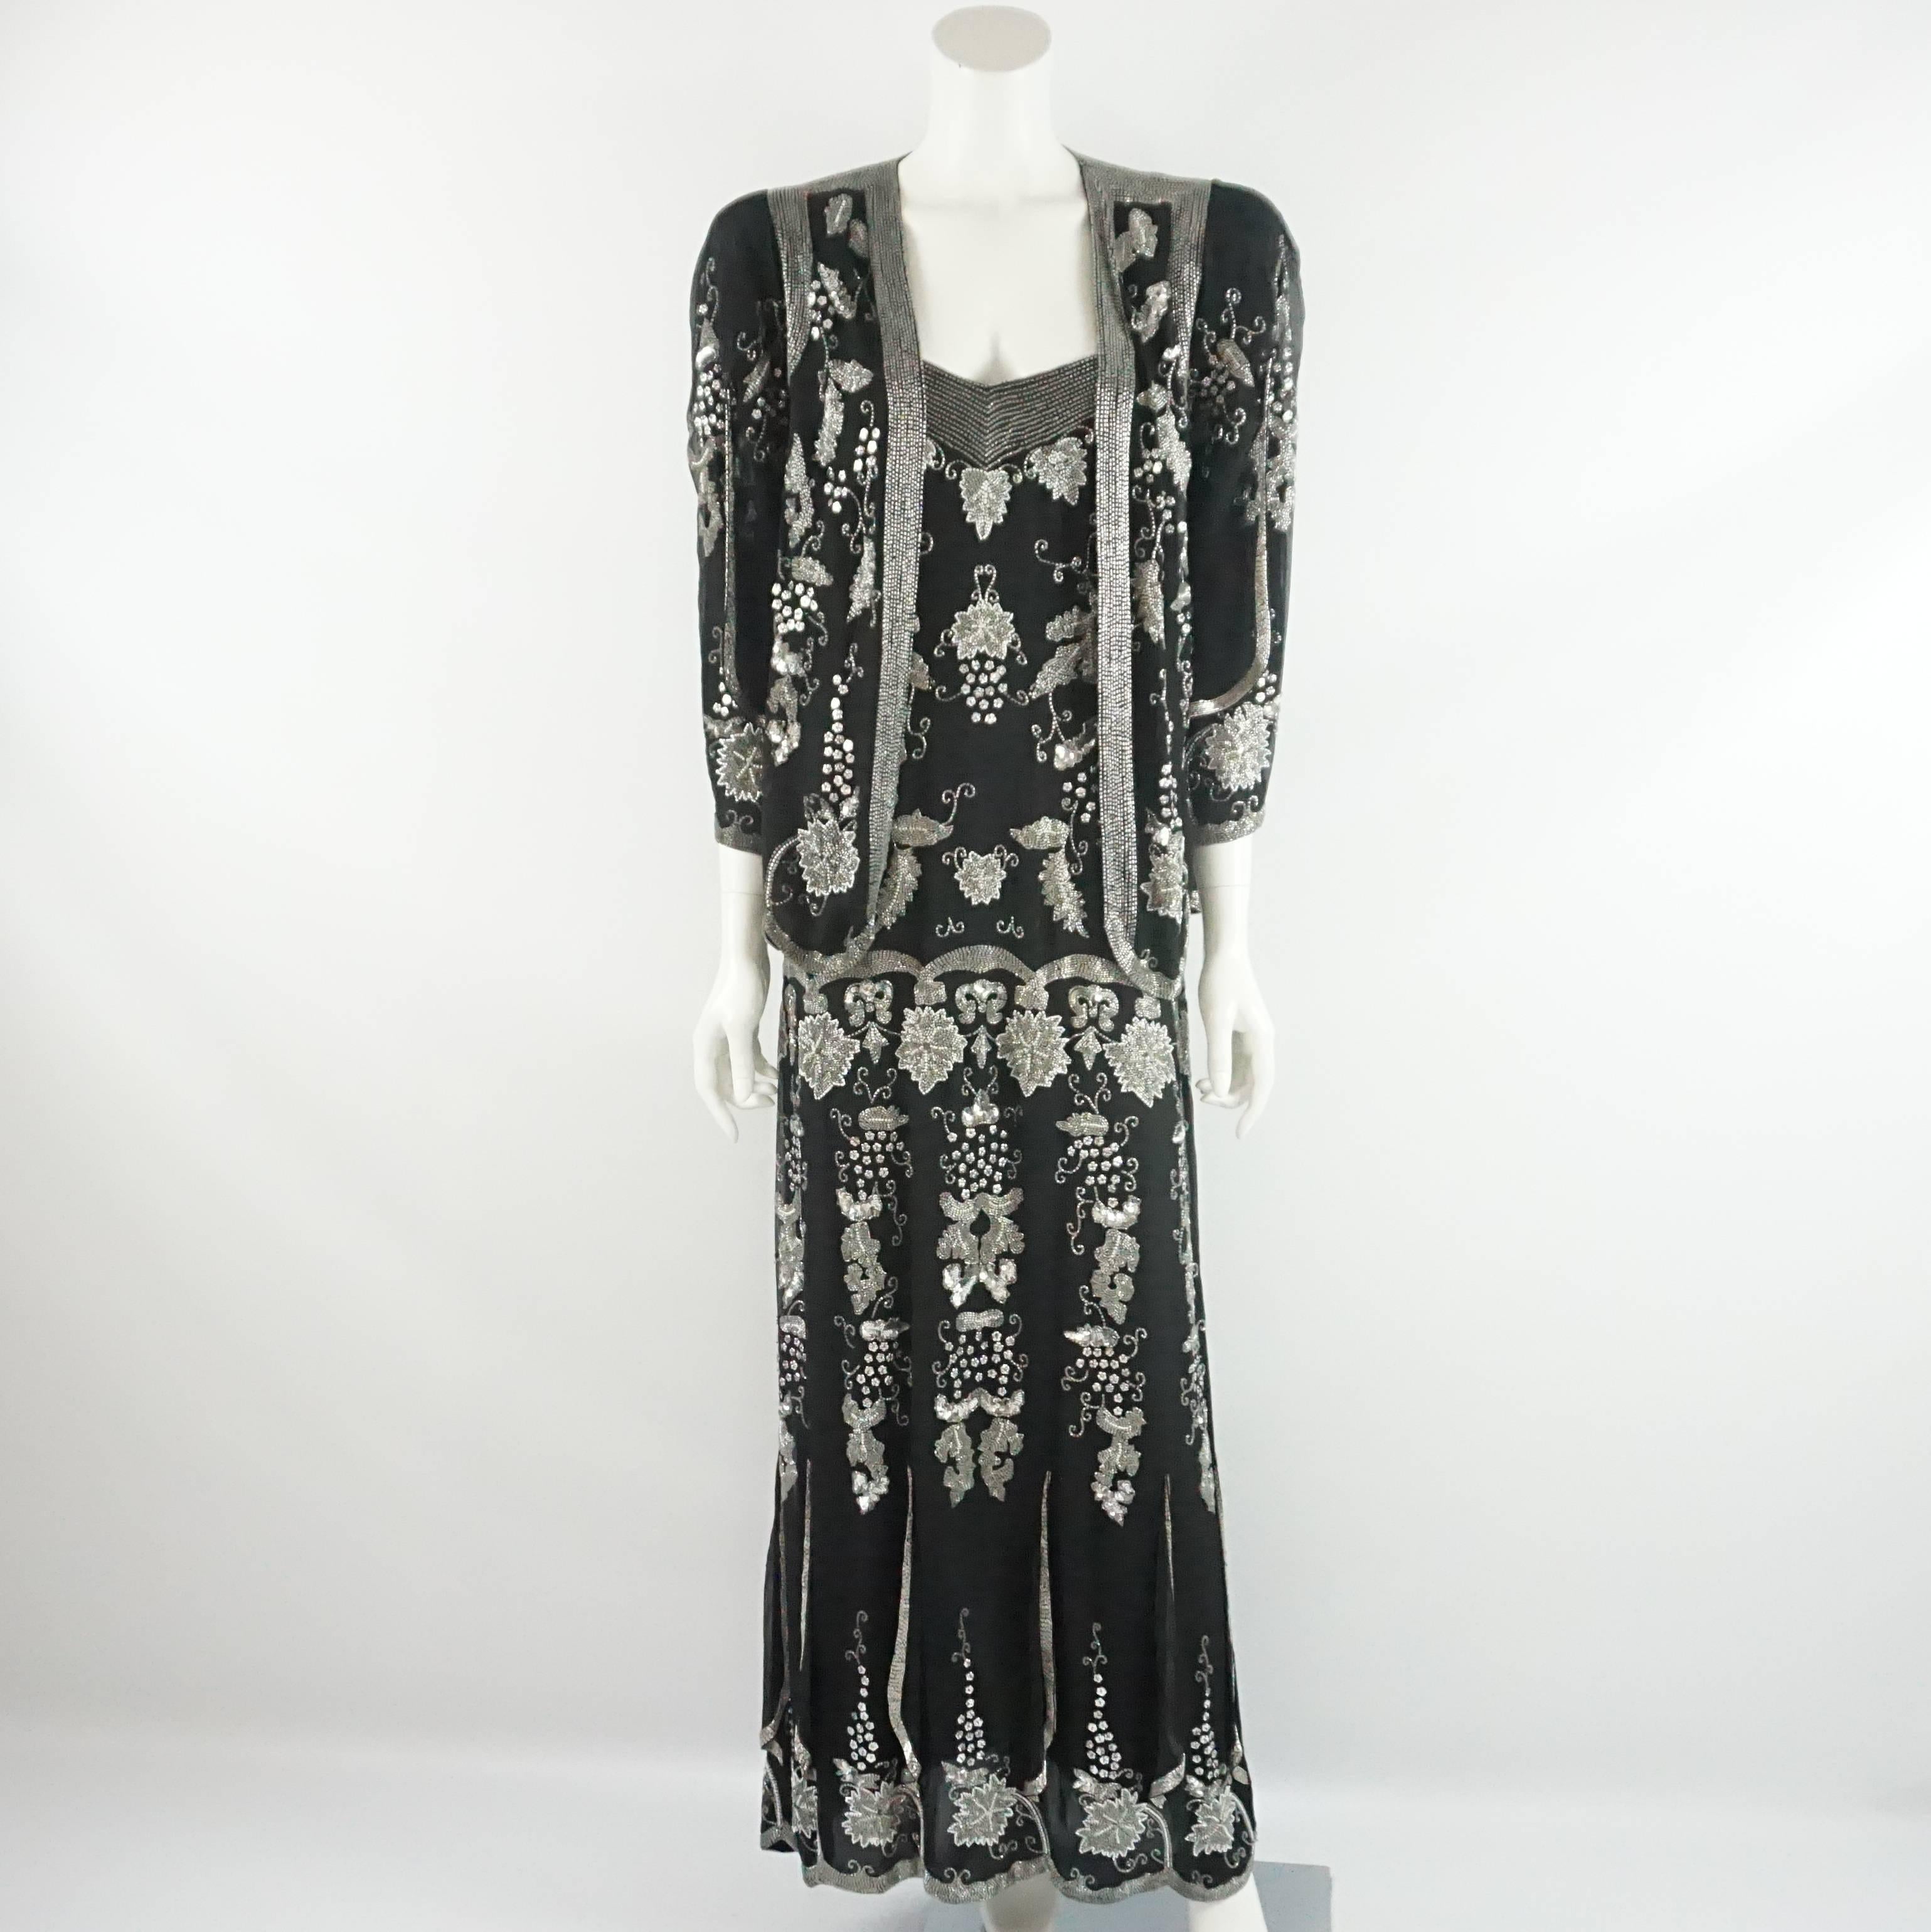 This vintage beaded dress is black with an intricate design of silver beads in an art deco style. It has spaghetti straps and a matching jacket. The jacket has no closure and a scallop hem. These pieces are in very good vintage condition with some